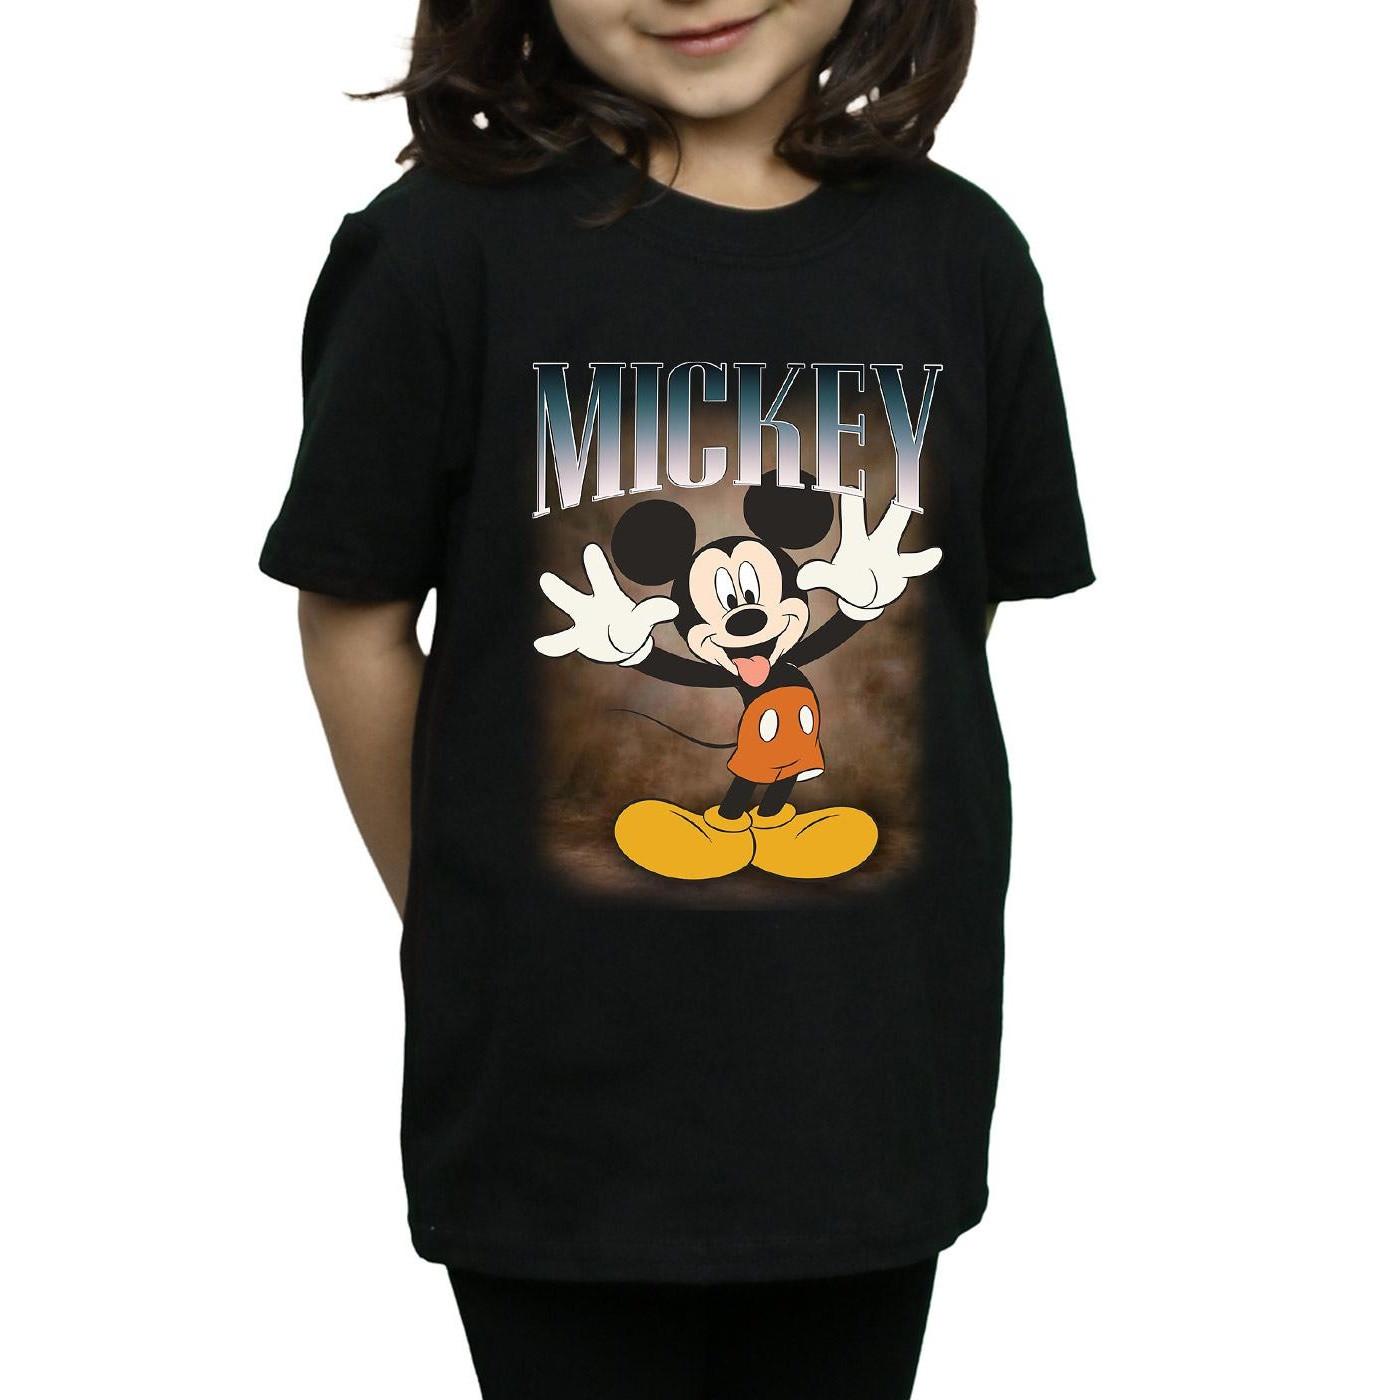 Disney  Tshirt MICKEY MOUSE TONGUE MONTAGE 